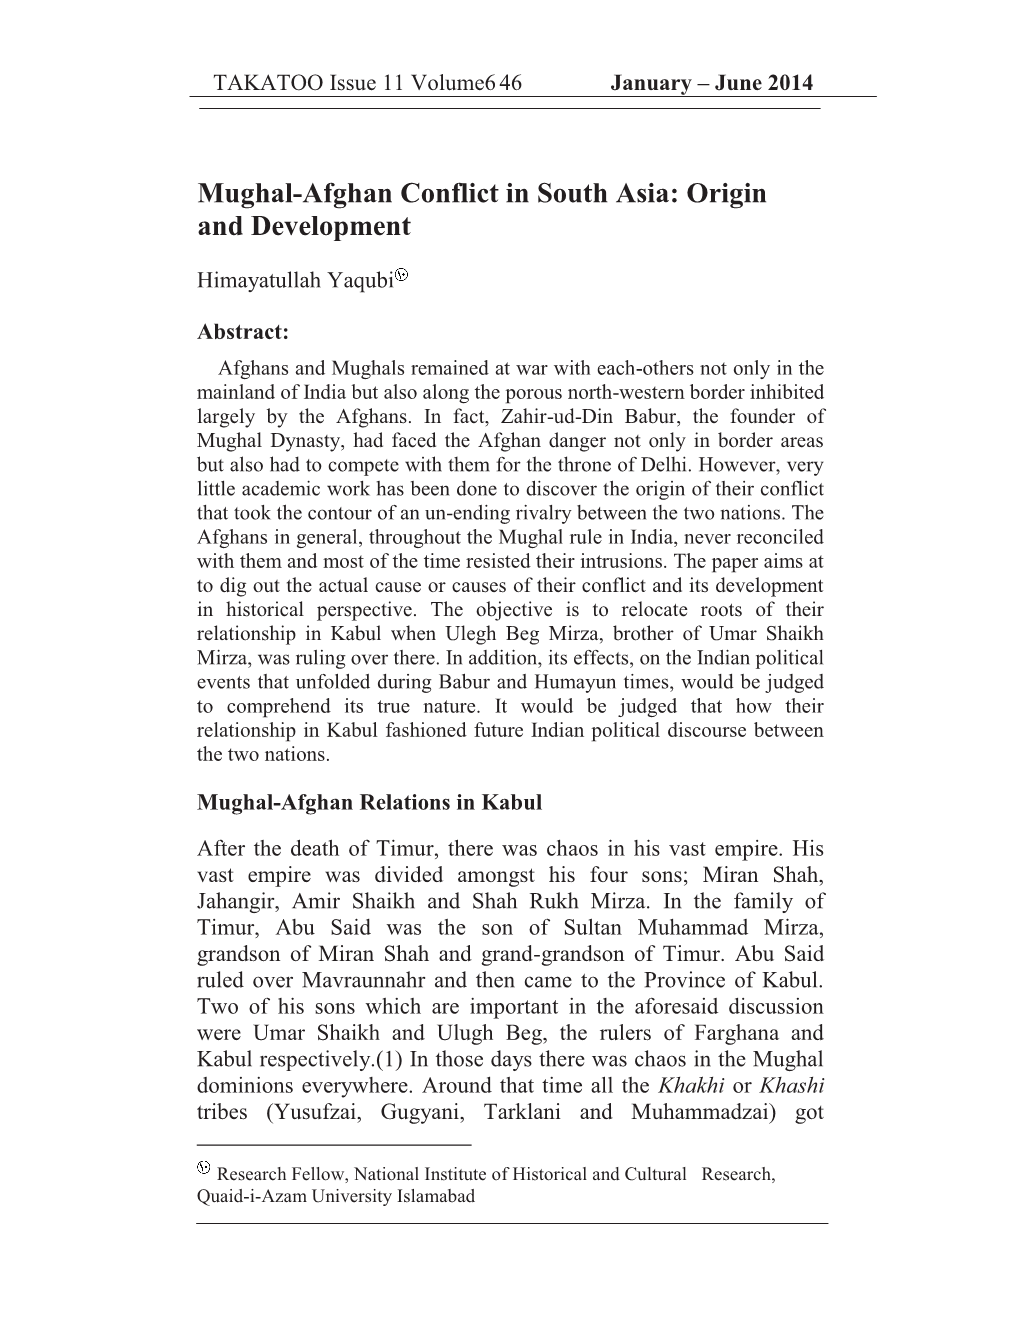 Mughal-Afghan Conflict in South Asia: Origin and Development